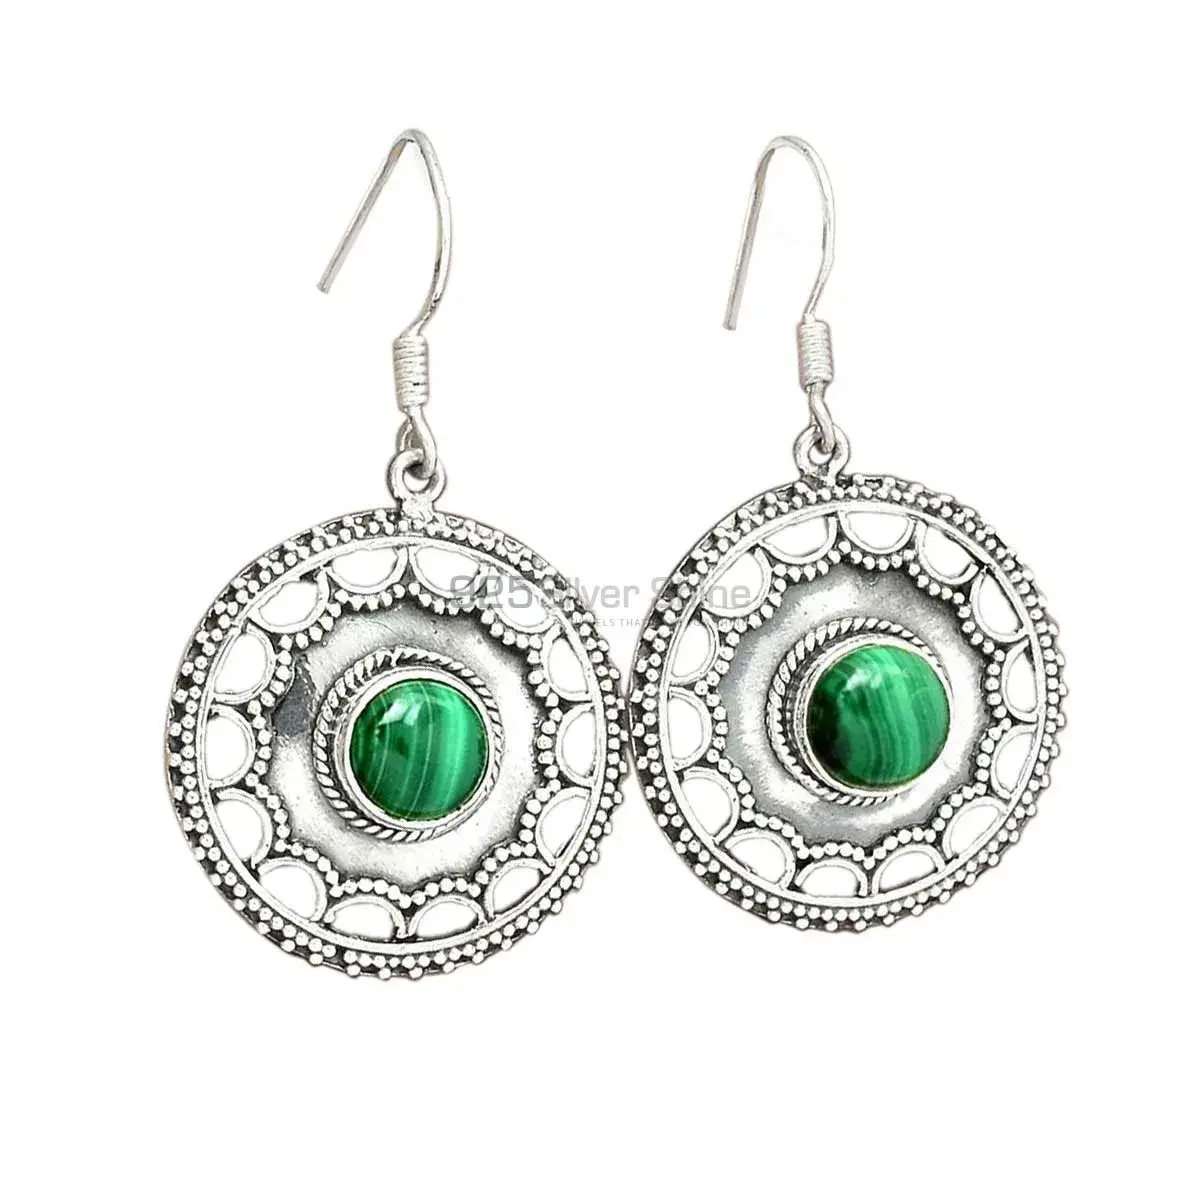 Affordable 925 Sterling Silver Handmade Earrings Suppliers In Malachite Gemstone Jewelry 925SE2799